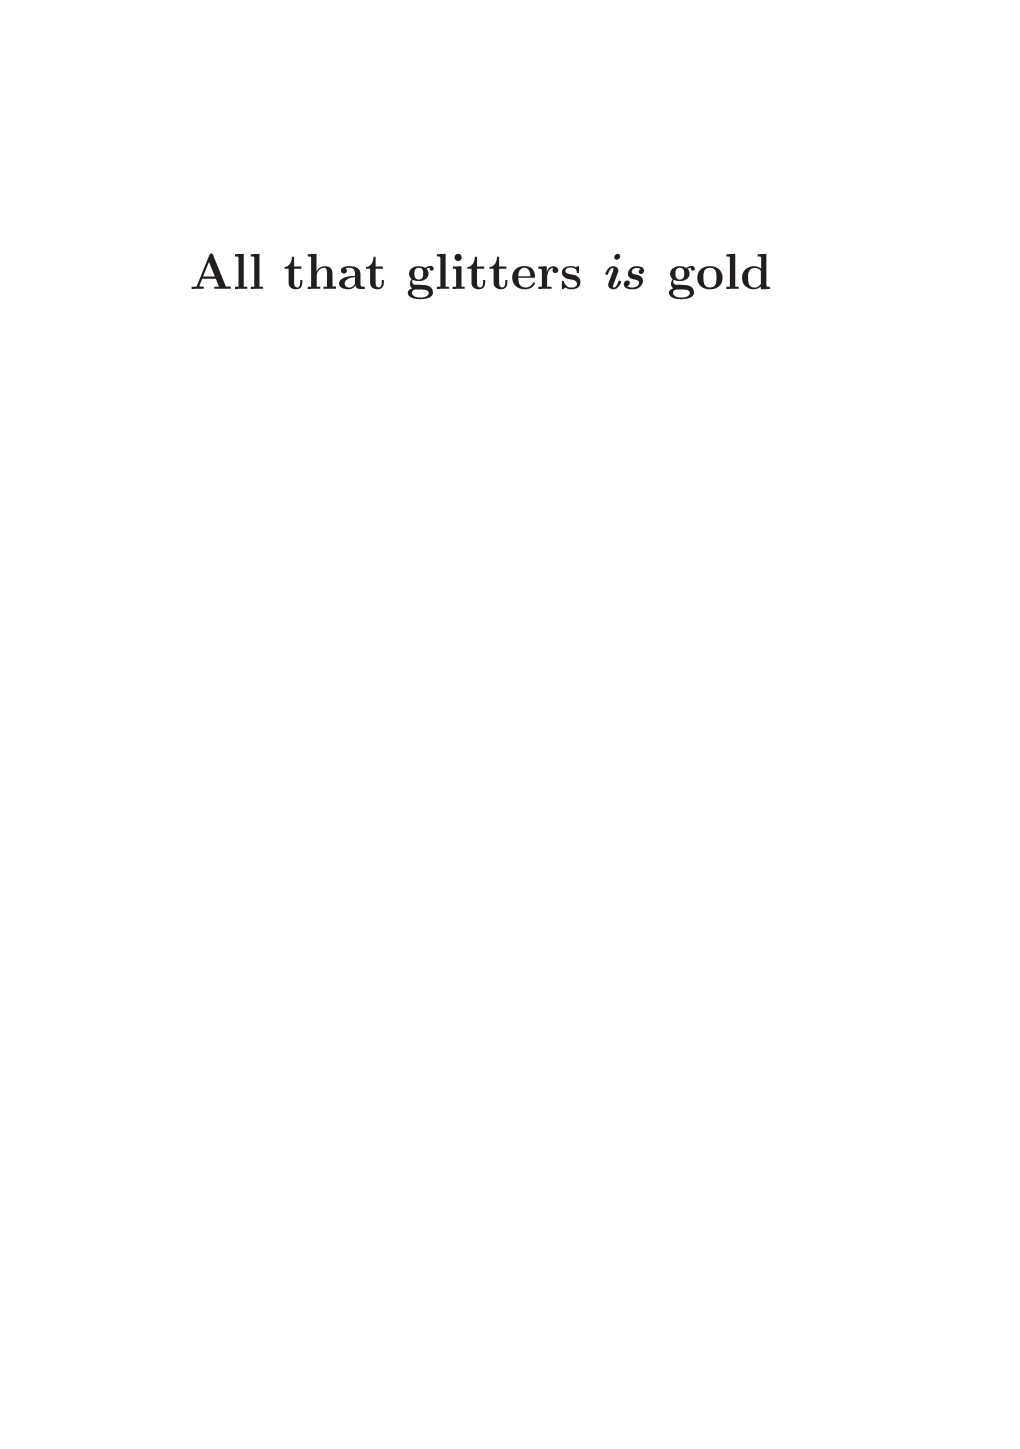 All That Glitters Is Gold Cover Design: Christian Weststrate Printed By: W¨Ohrmann Print Service Isbn 978-94-6186-007-1 Copyright �C 2011, S